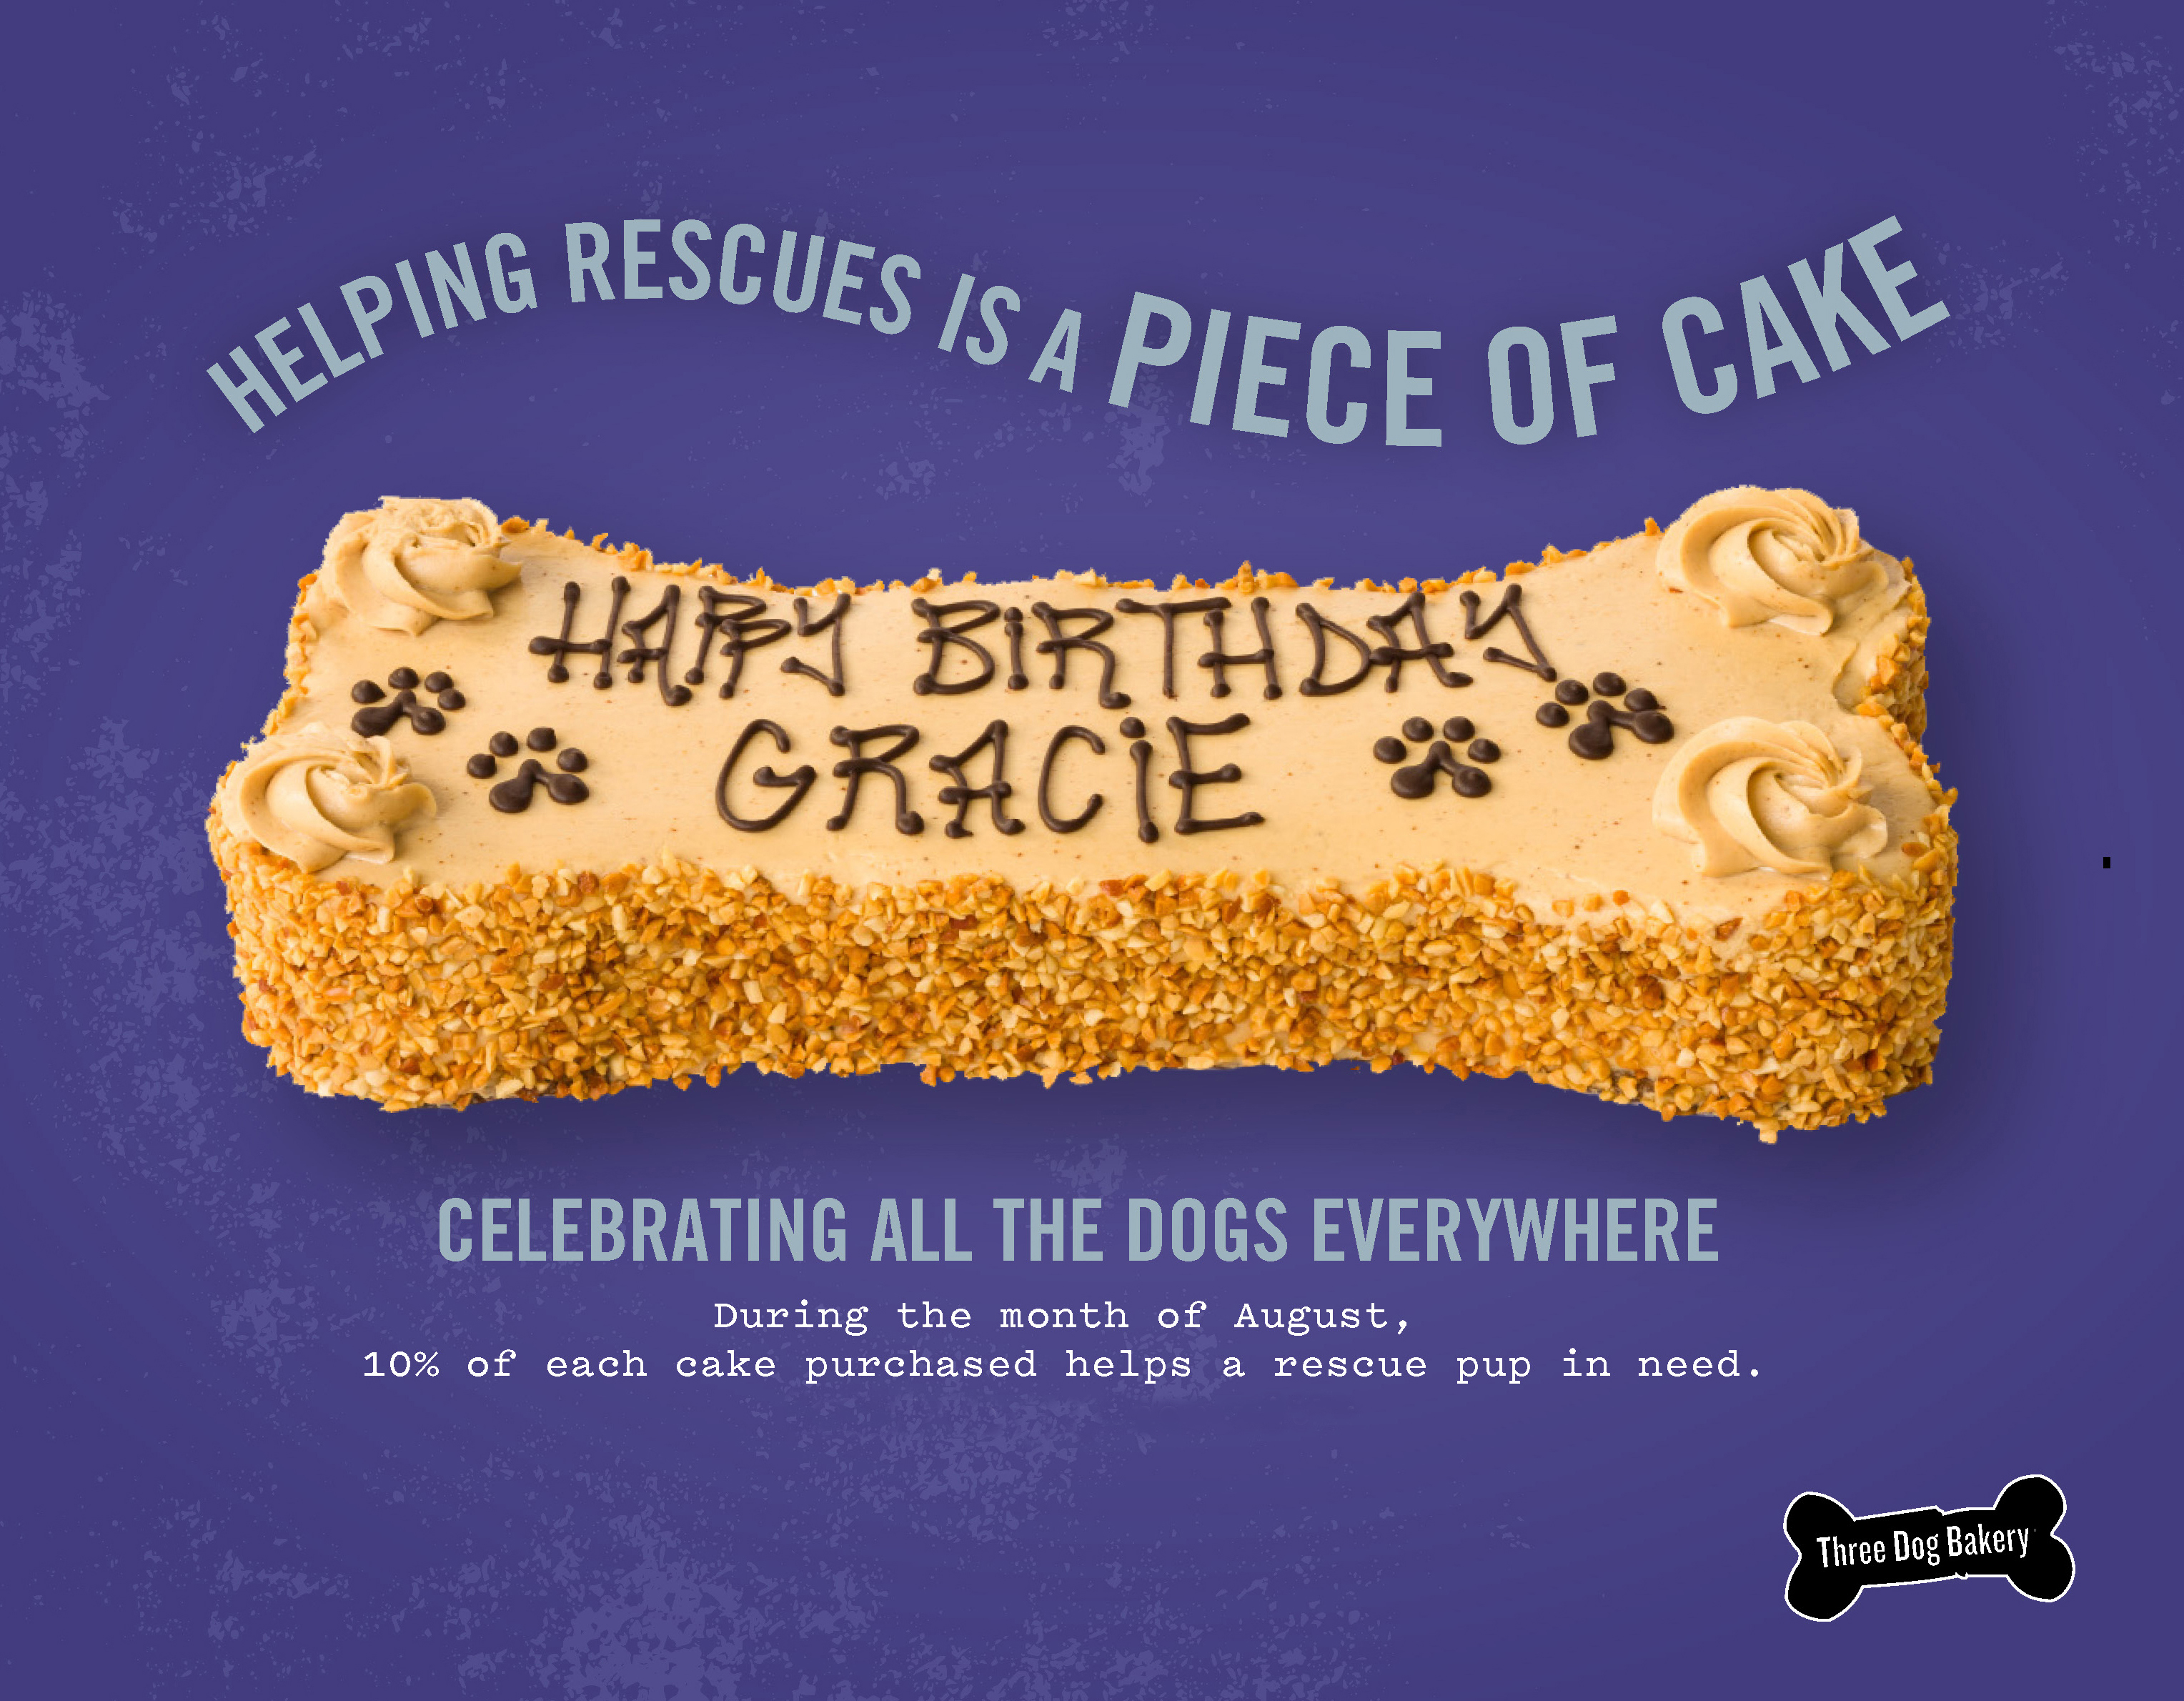 Helping Rescues Is A Piece Of Cake - Three Dog Bakery